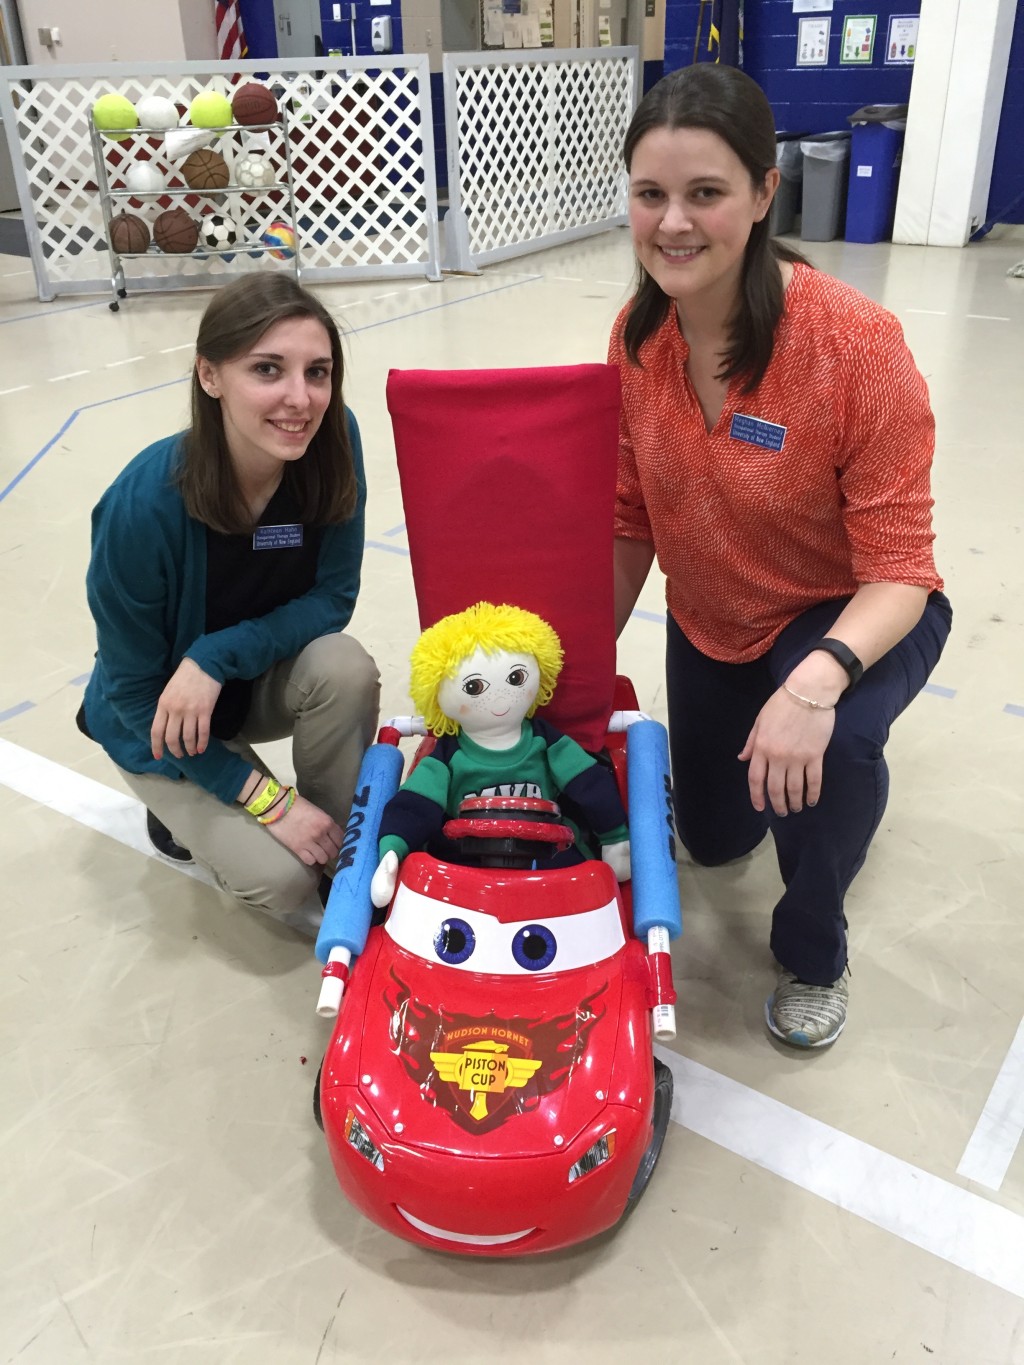 Kati Hahn and Meghan McNierney with the Go Baby Go Car